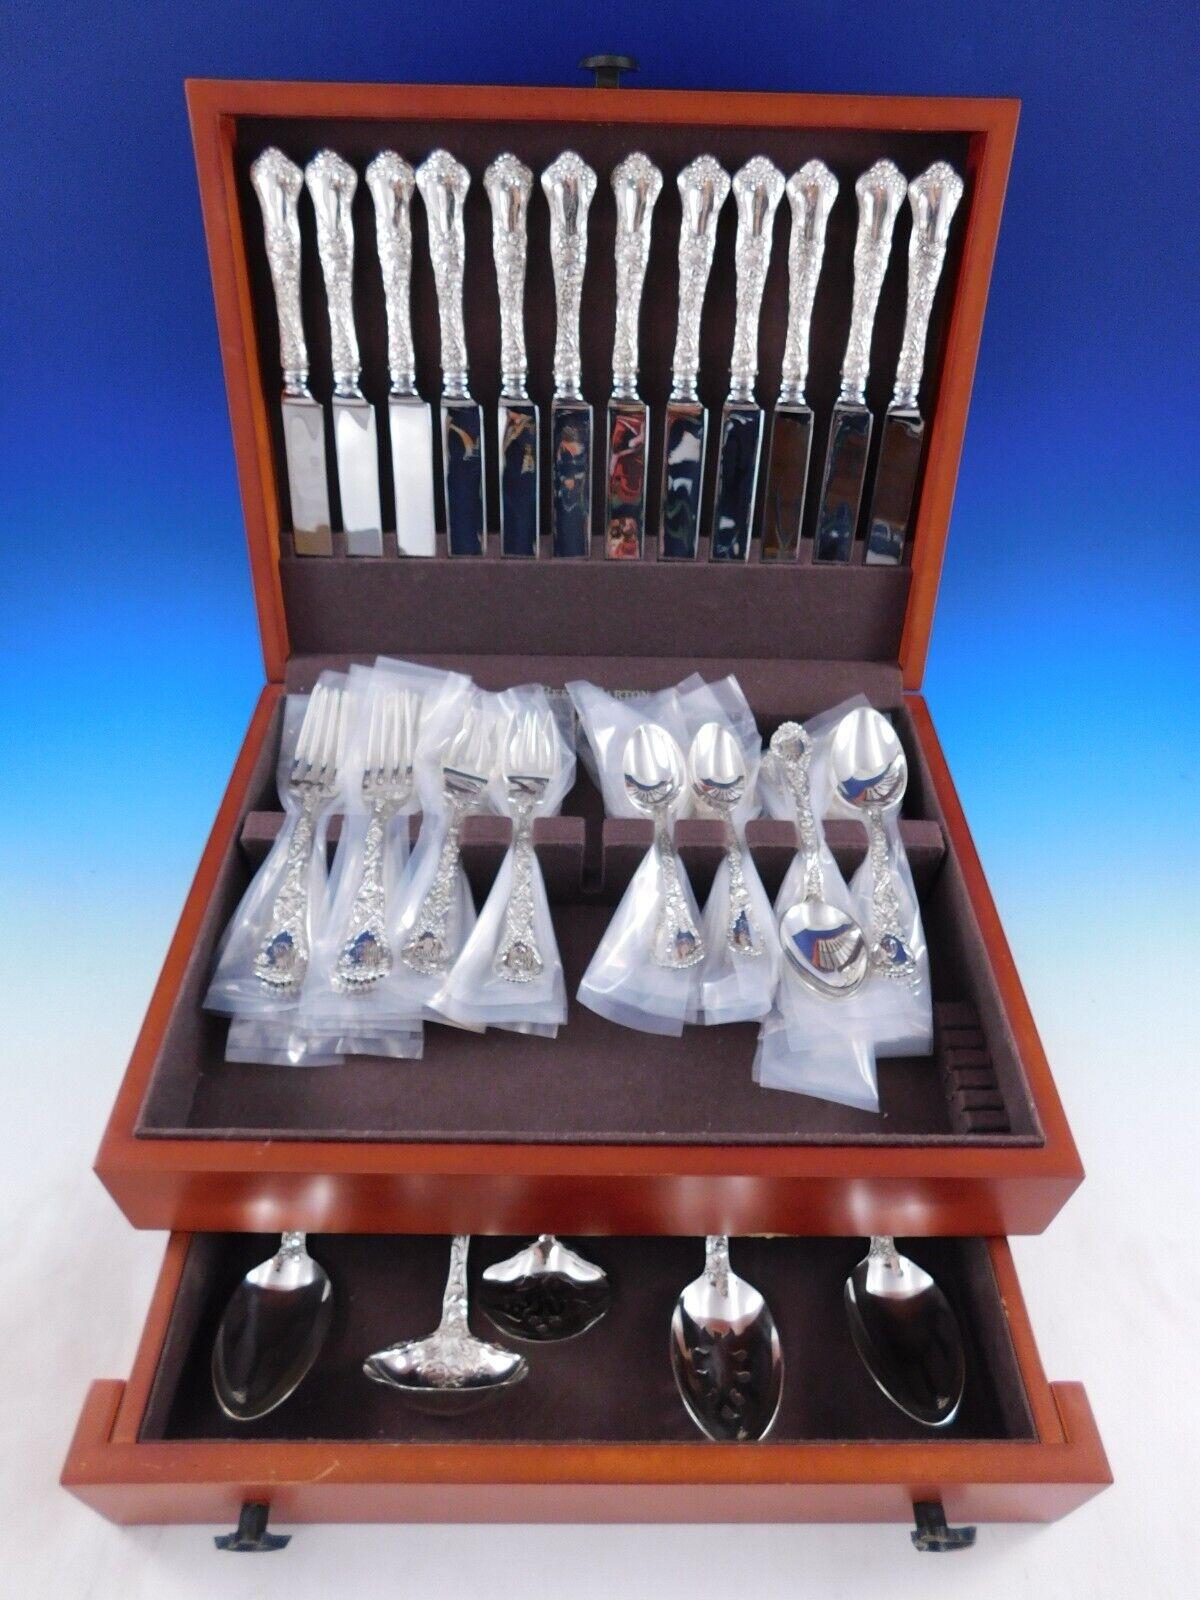 Dinner Size Meadow by Gorham sterling silver Flatware set - 65 pieces. 
This multi-motif pattern features various finely detailed scenes of flowers, cattails, clover, grasses, and foliage found in the American Meadow. The pattern was designed by